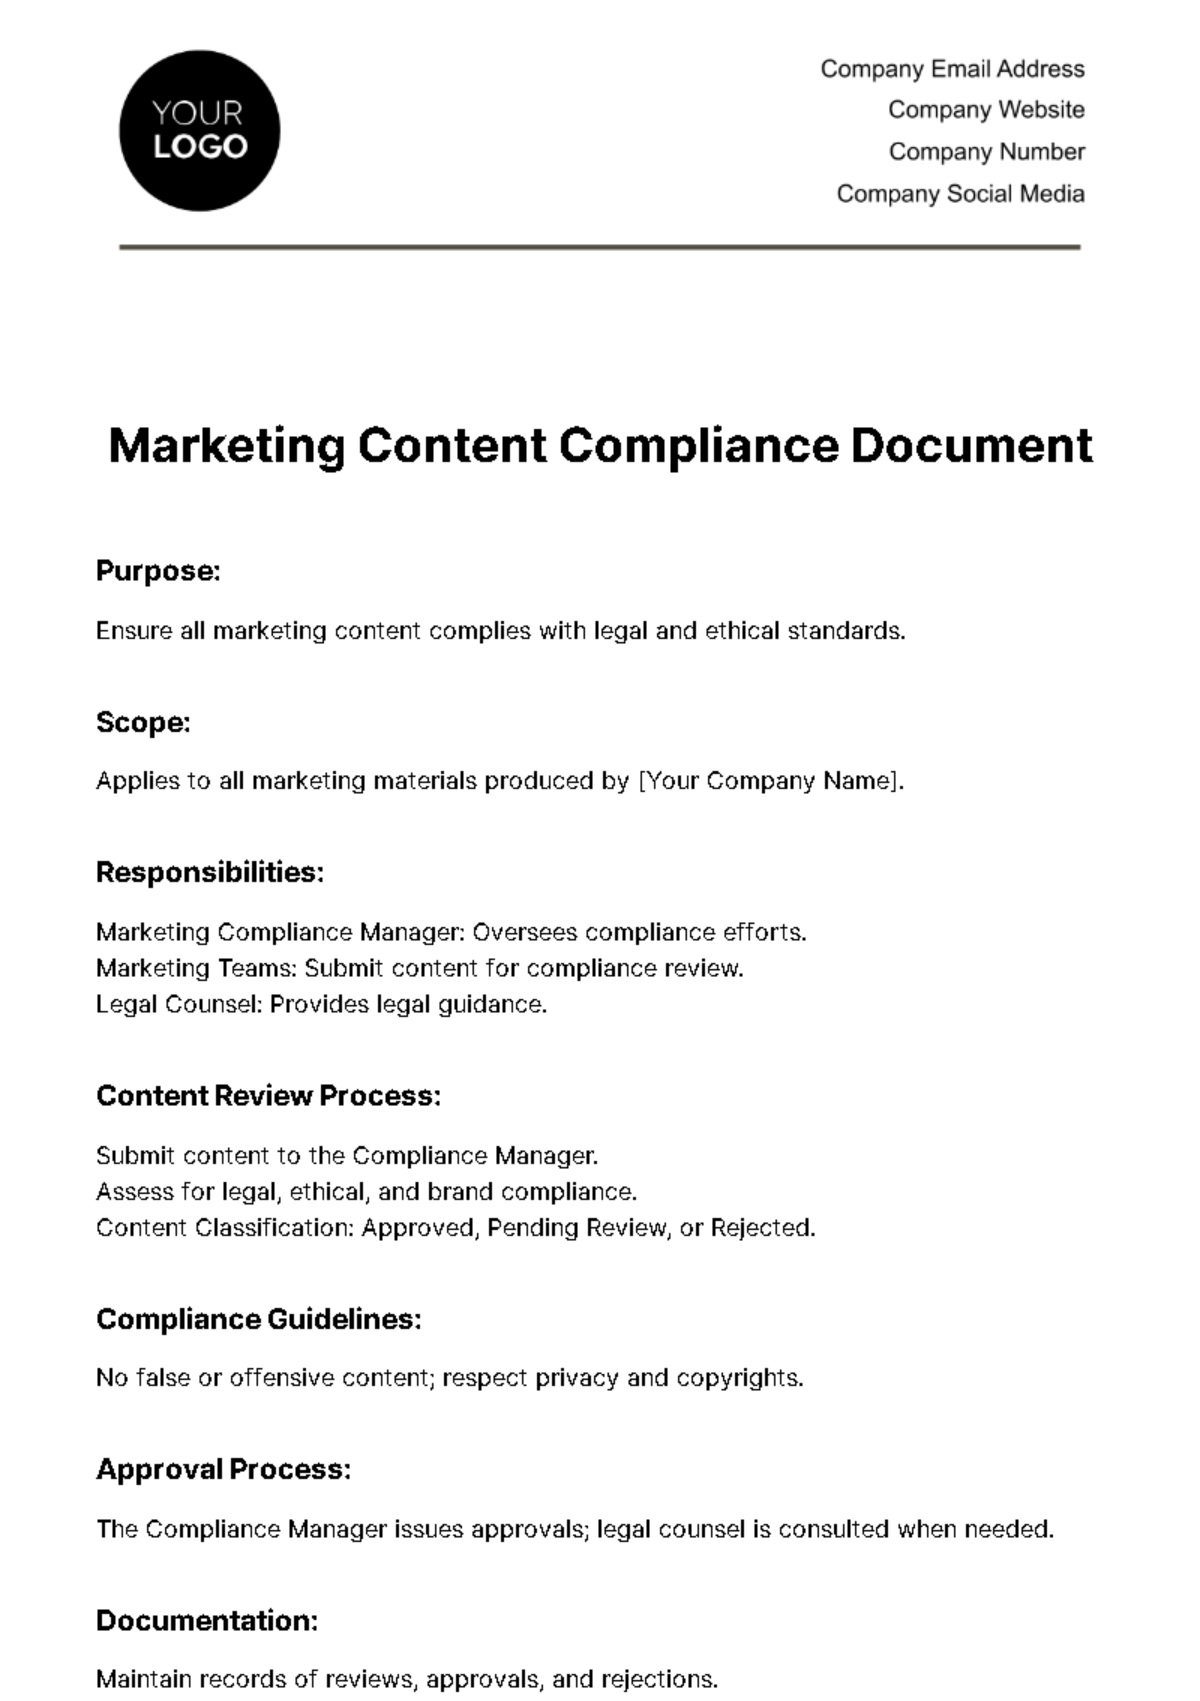 Free Marketing Content Compliance Document Template